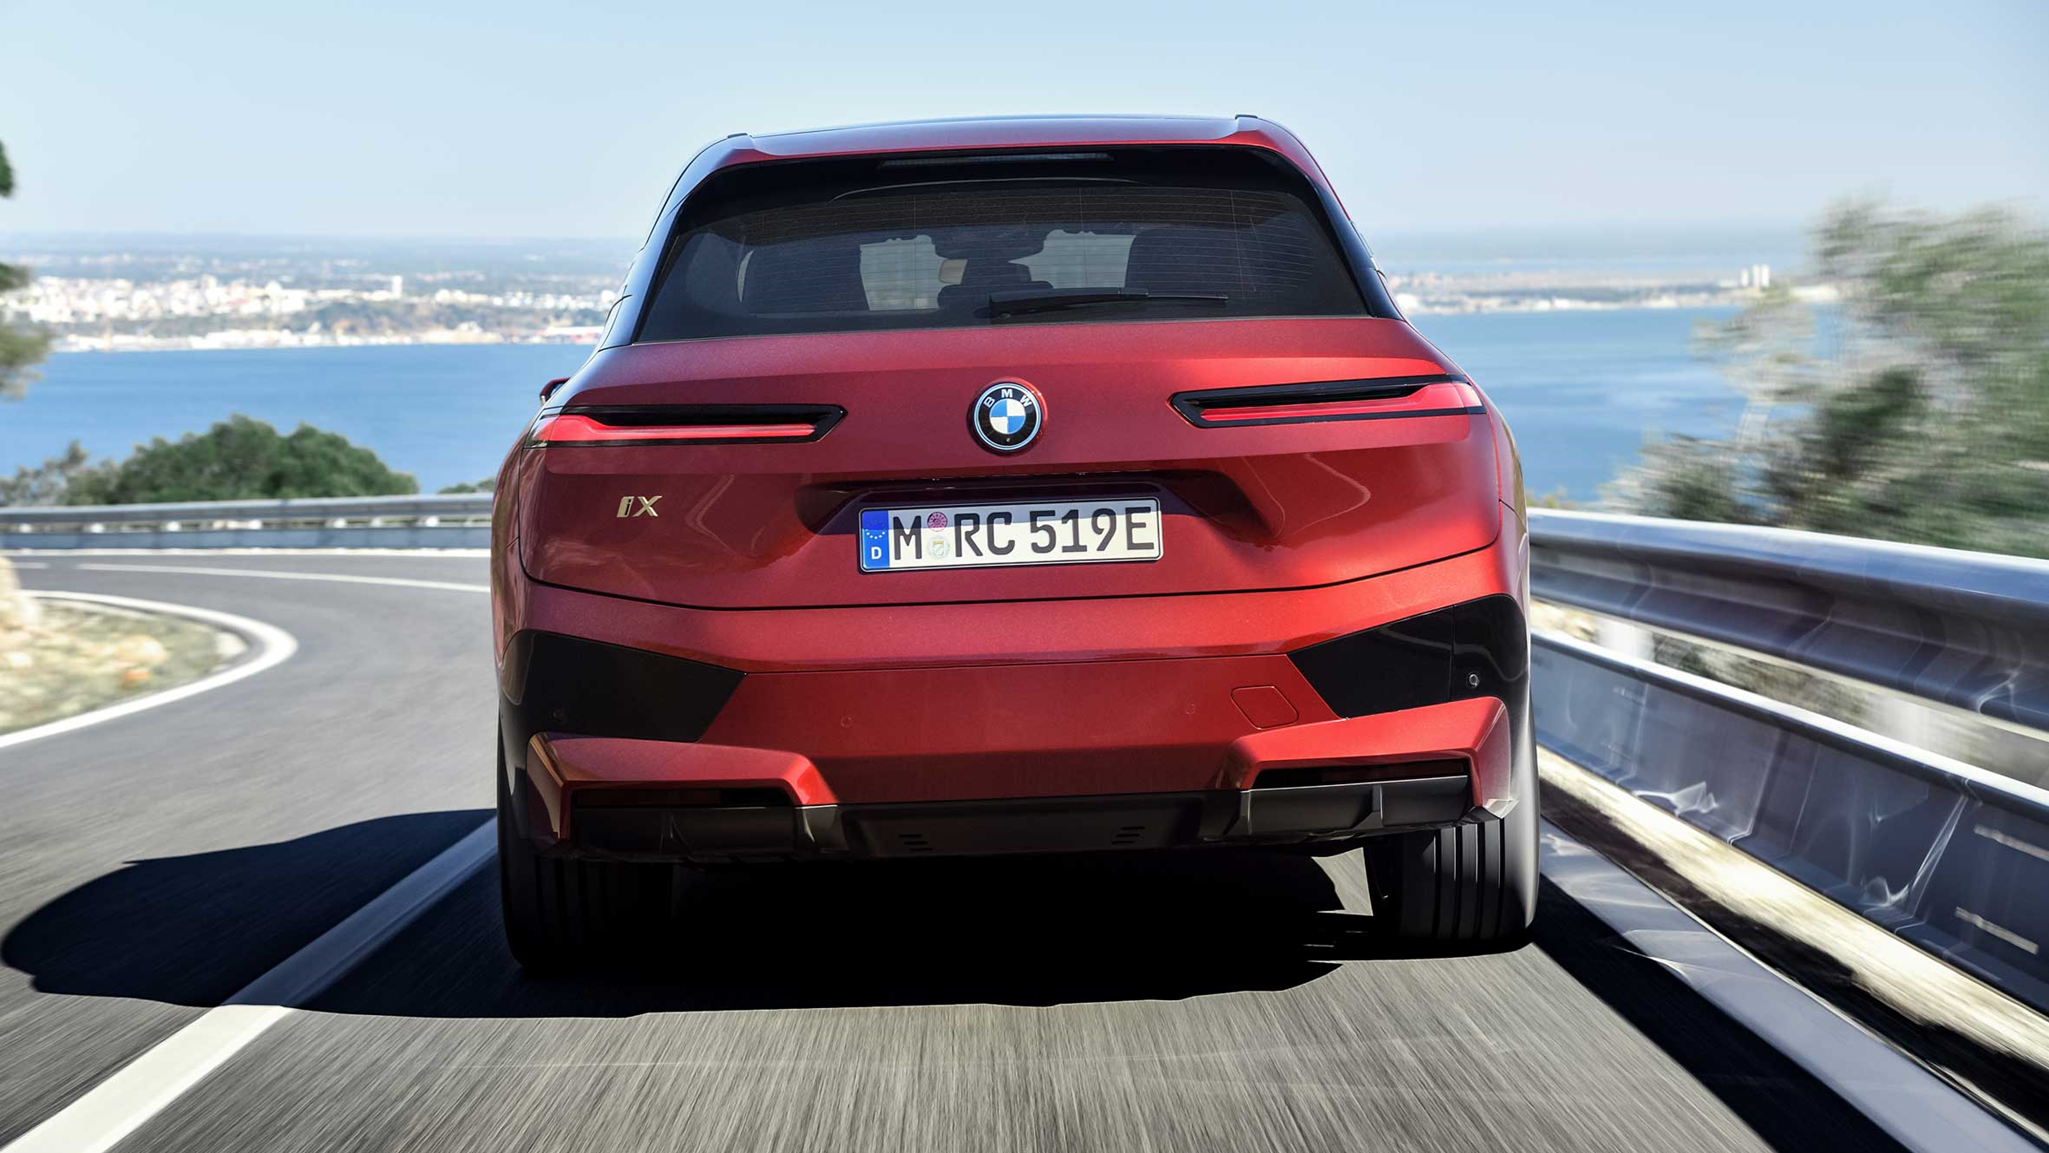 BMW iX SUV Is BMW's Best-Selling Electric Vehicle In India